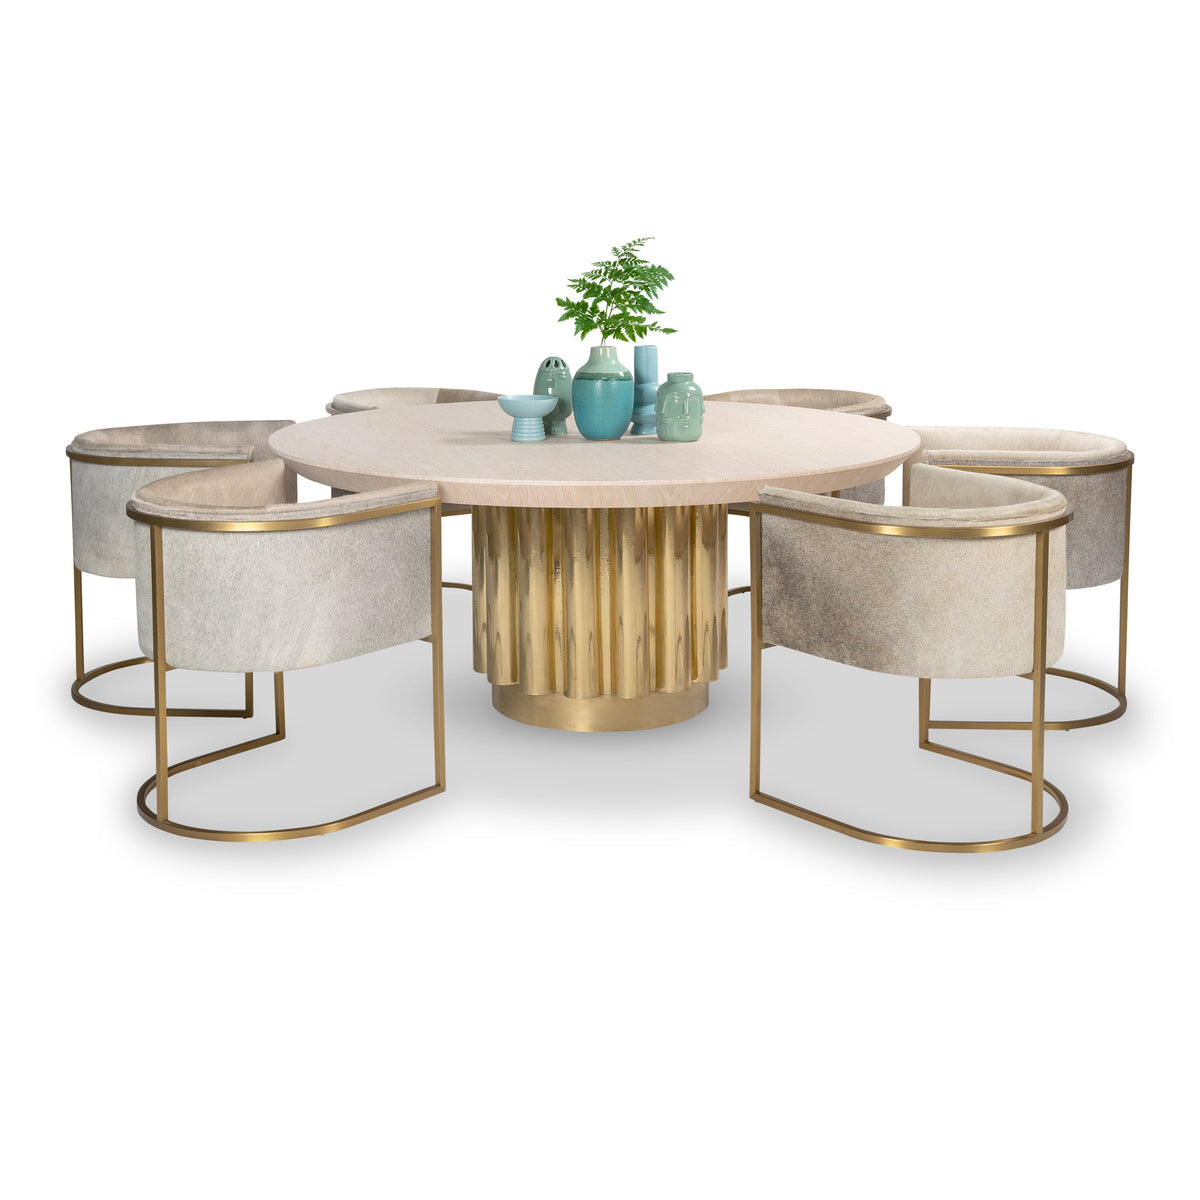 Eden Rock Dining Table With White Oak Top and Brass Base